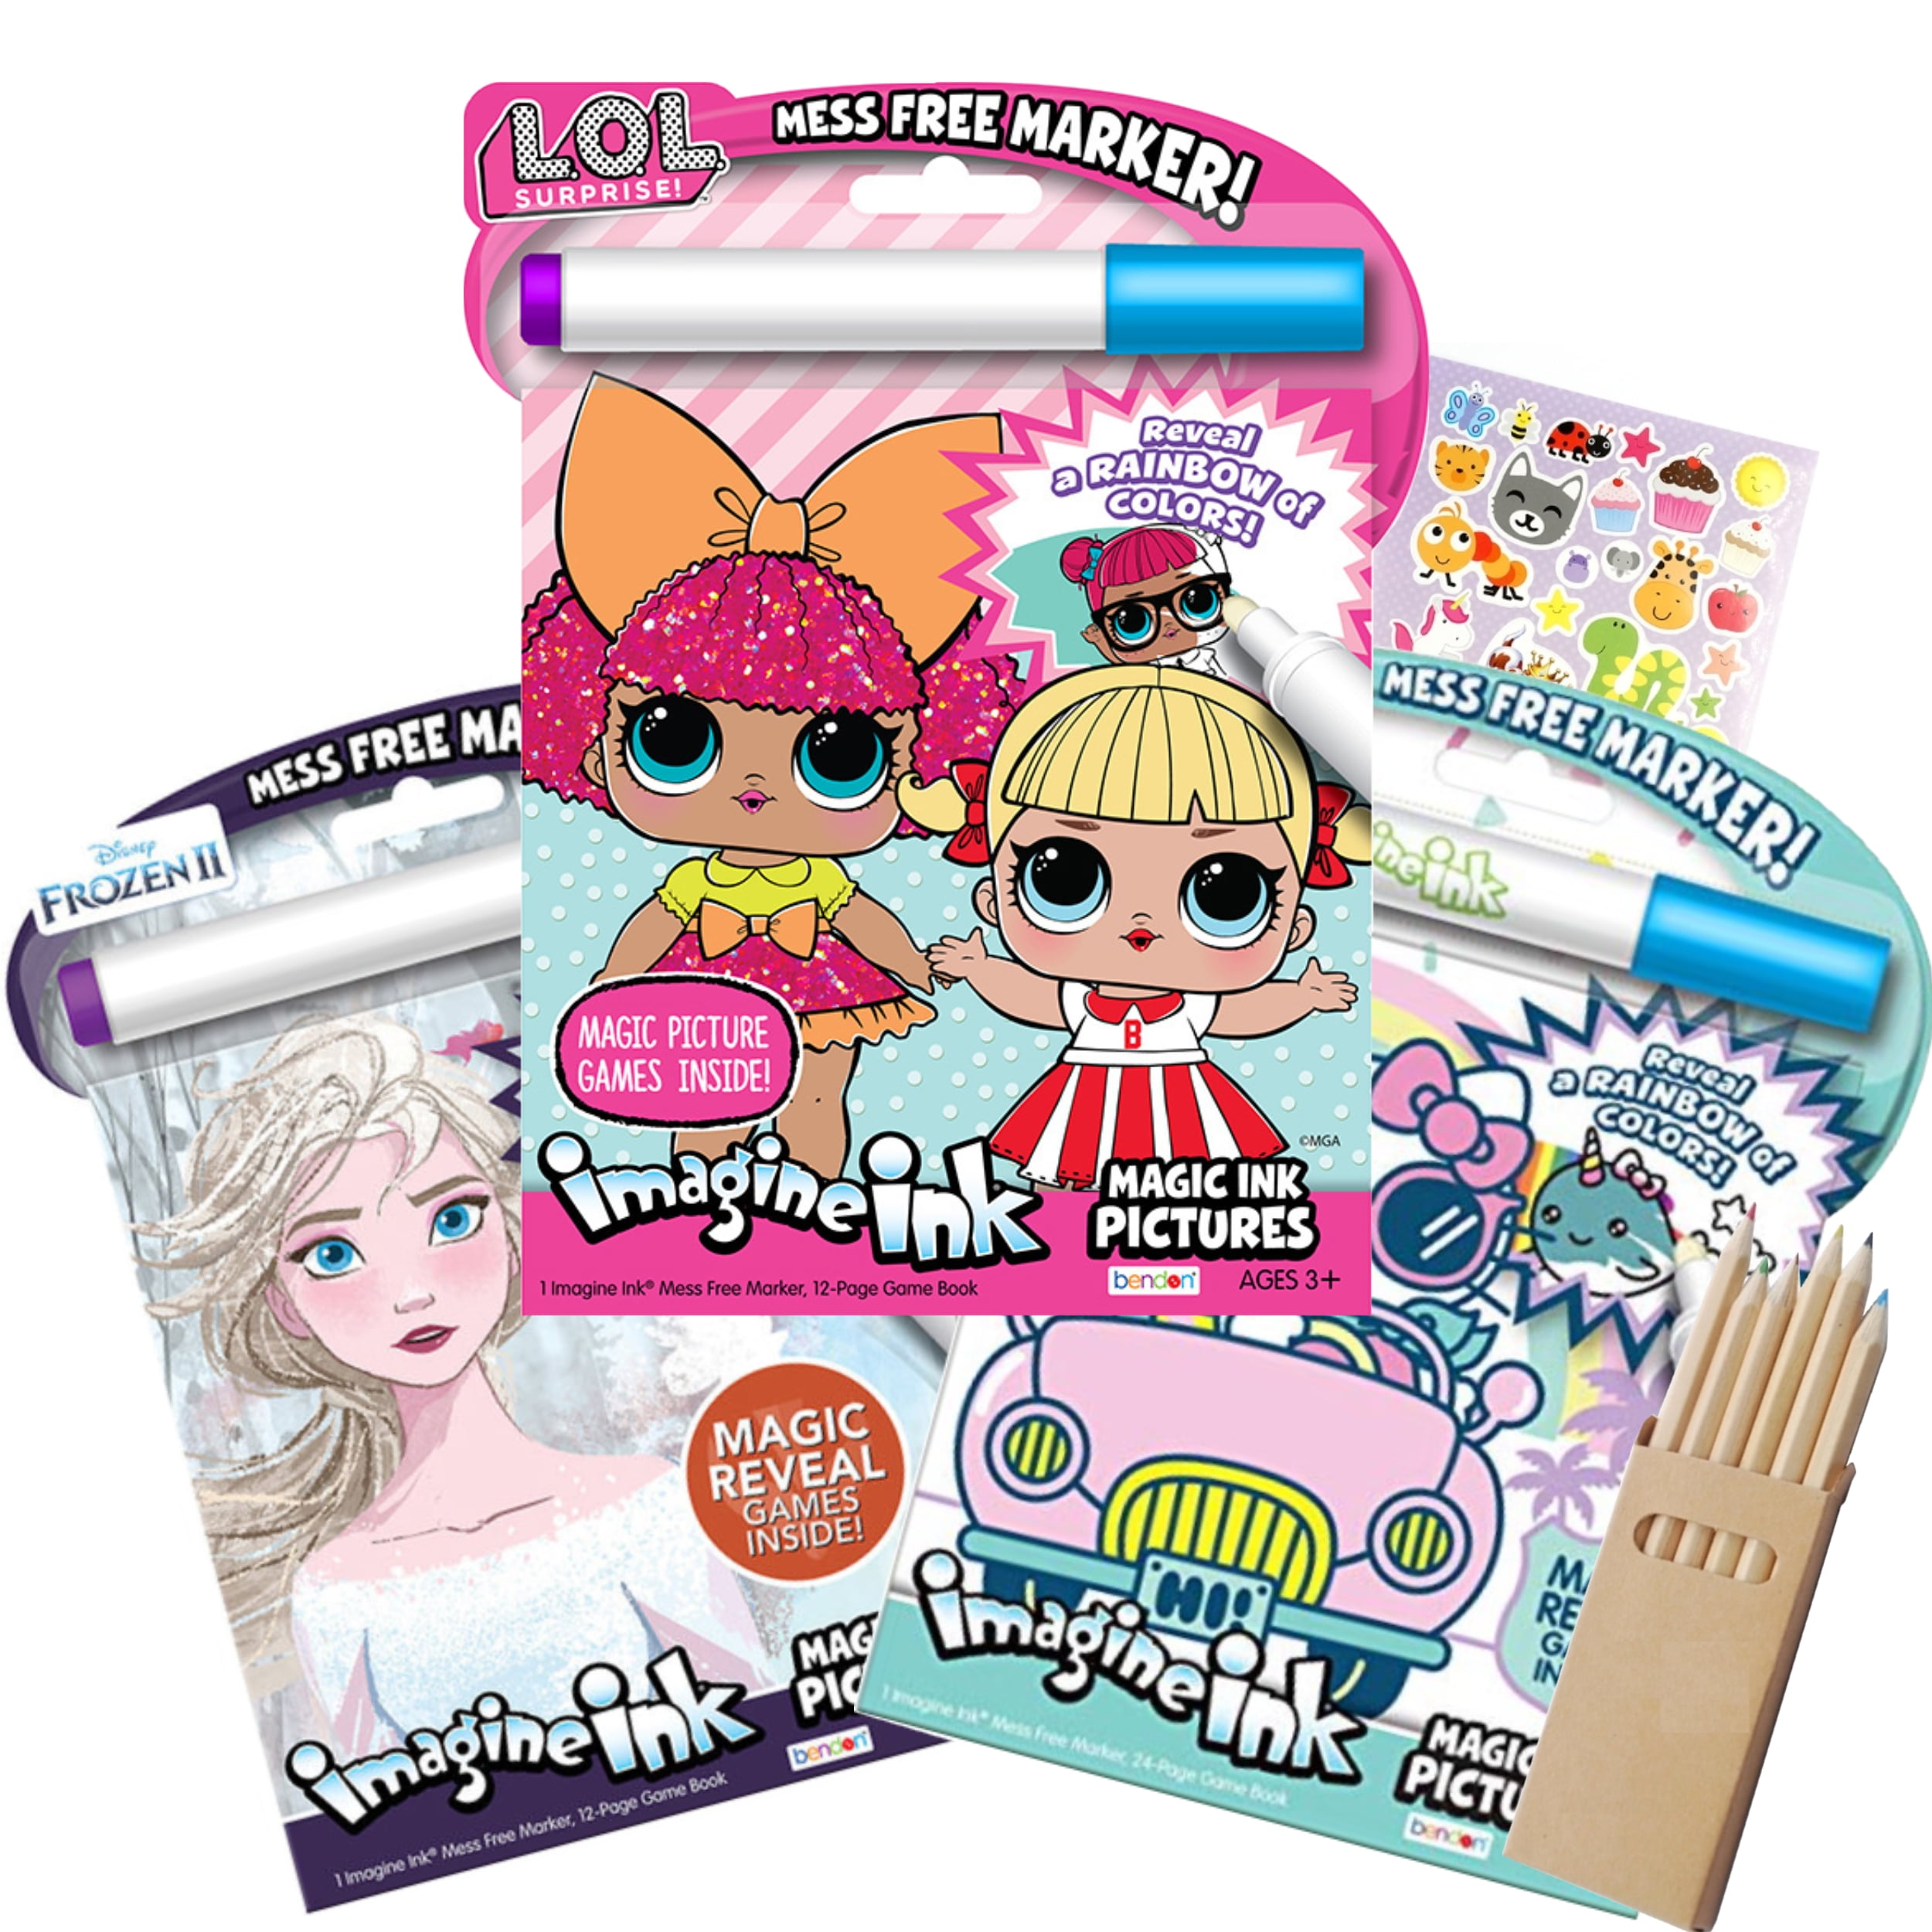 Disney Bundle Miraculous Ladybug Activity Set for Kids - with 80pg Coloring  Book, Grab n Go Play Pack, Imagine Ink Stickers, and More (Miraculous